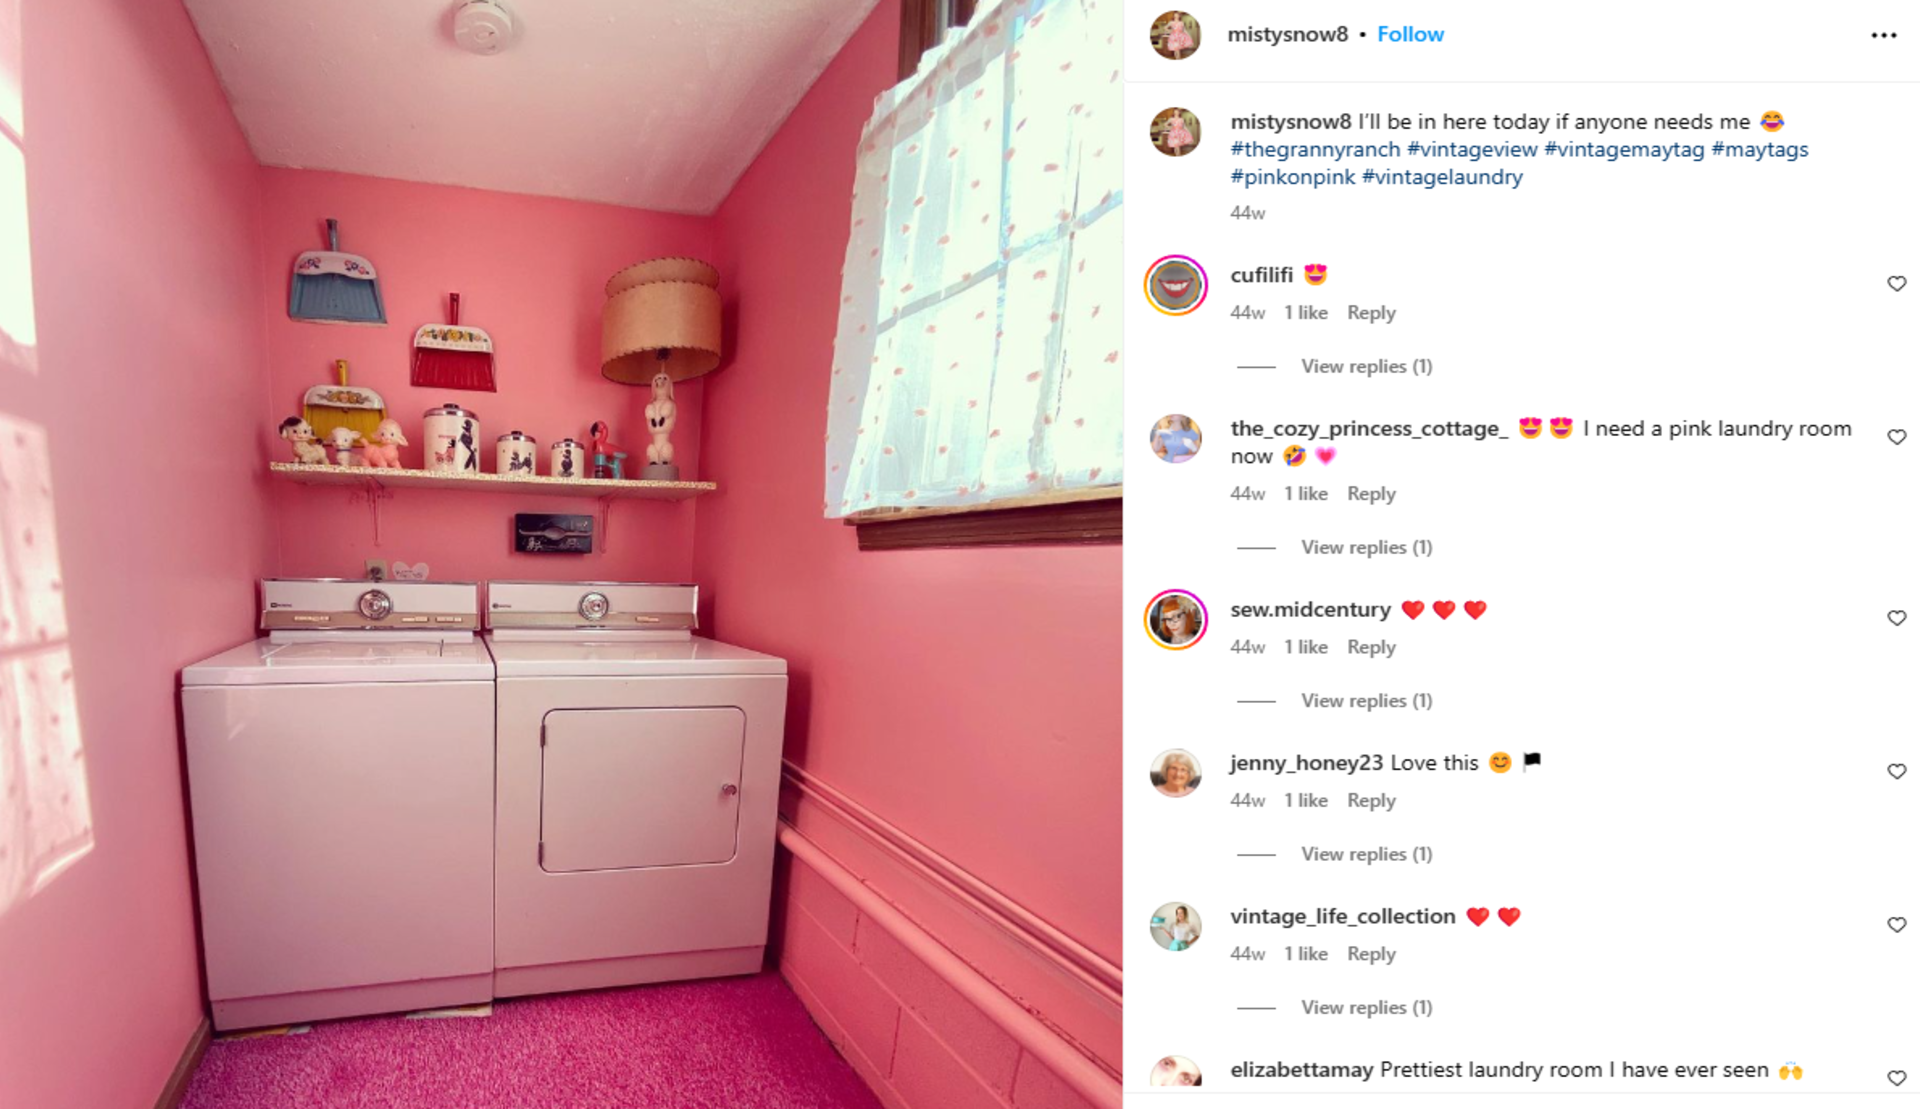 A pink laundry room